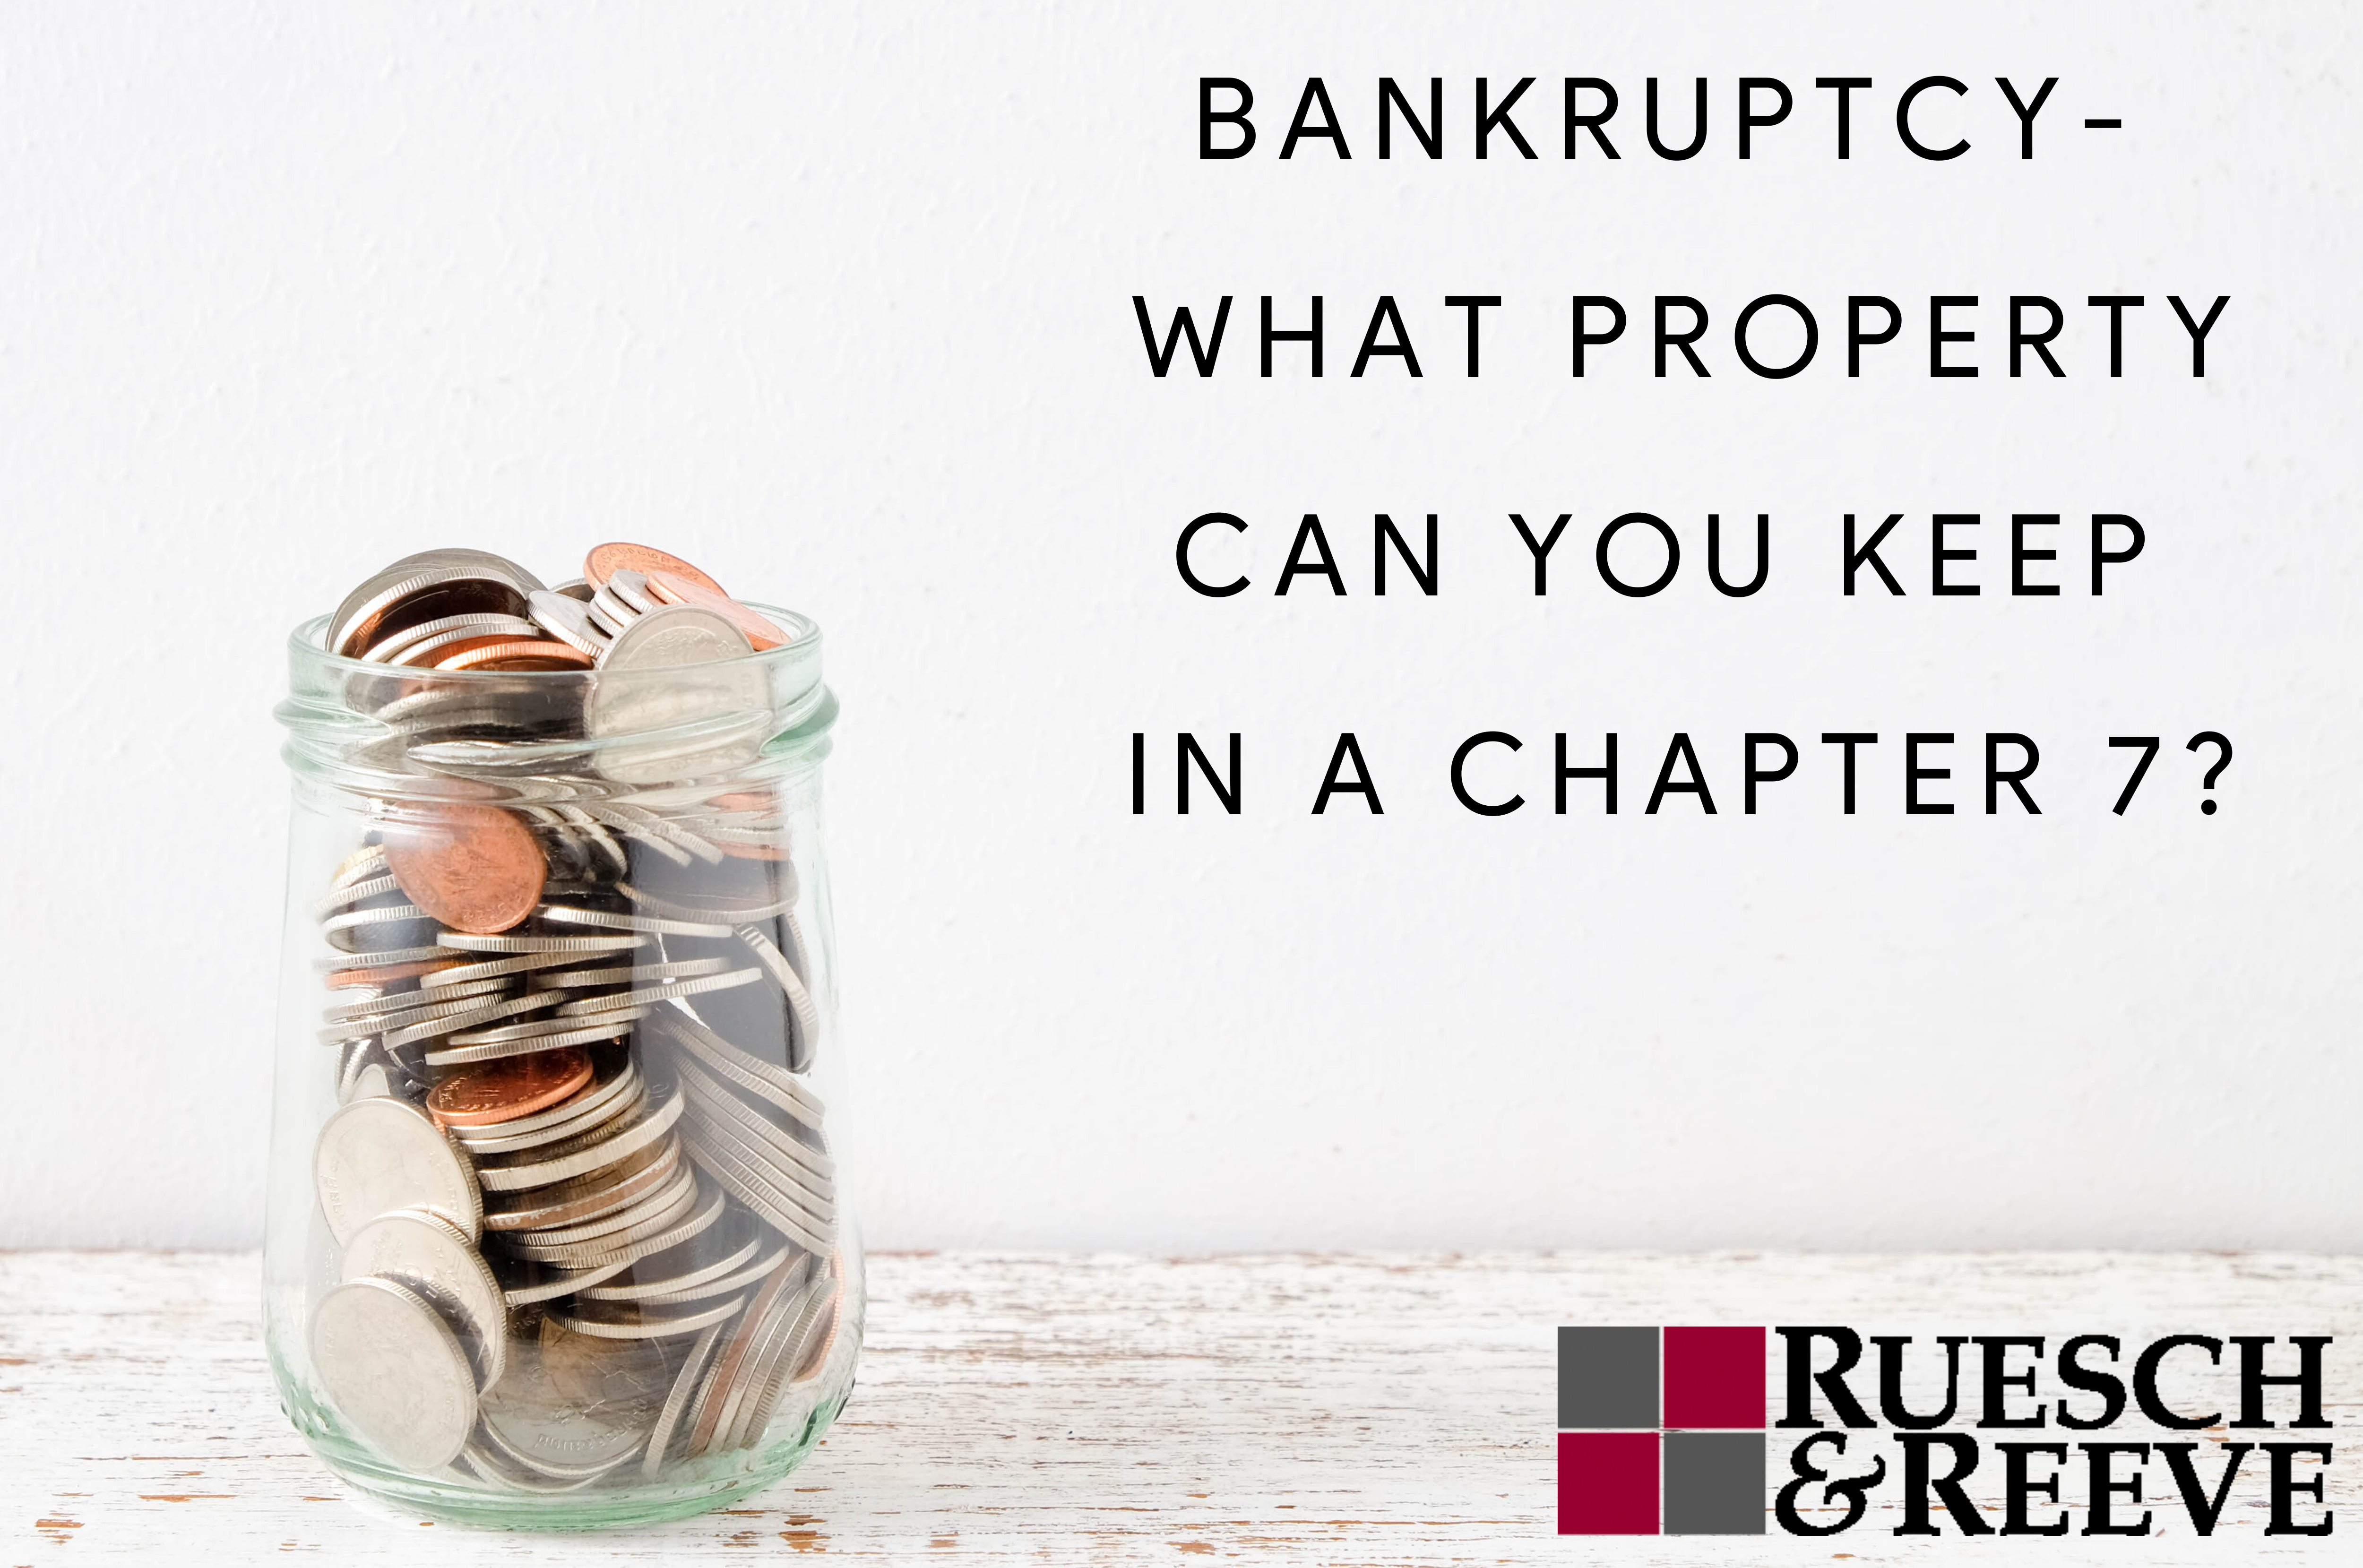 Bankruptcy- What Property Can You Keep in a Chapter 7?